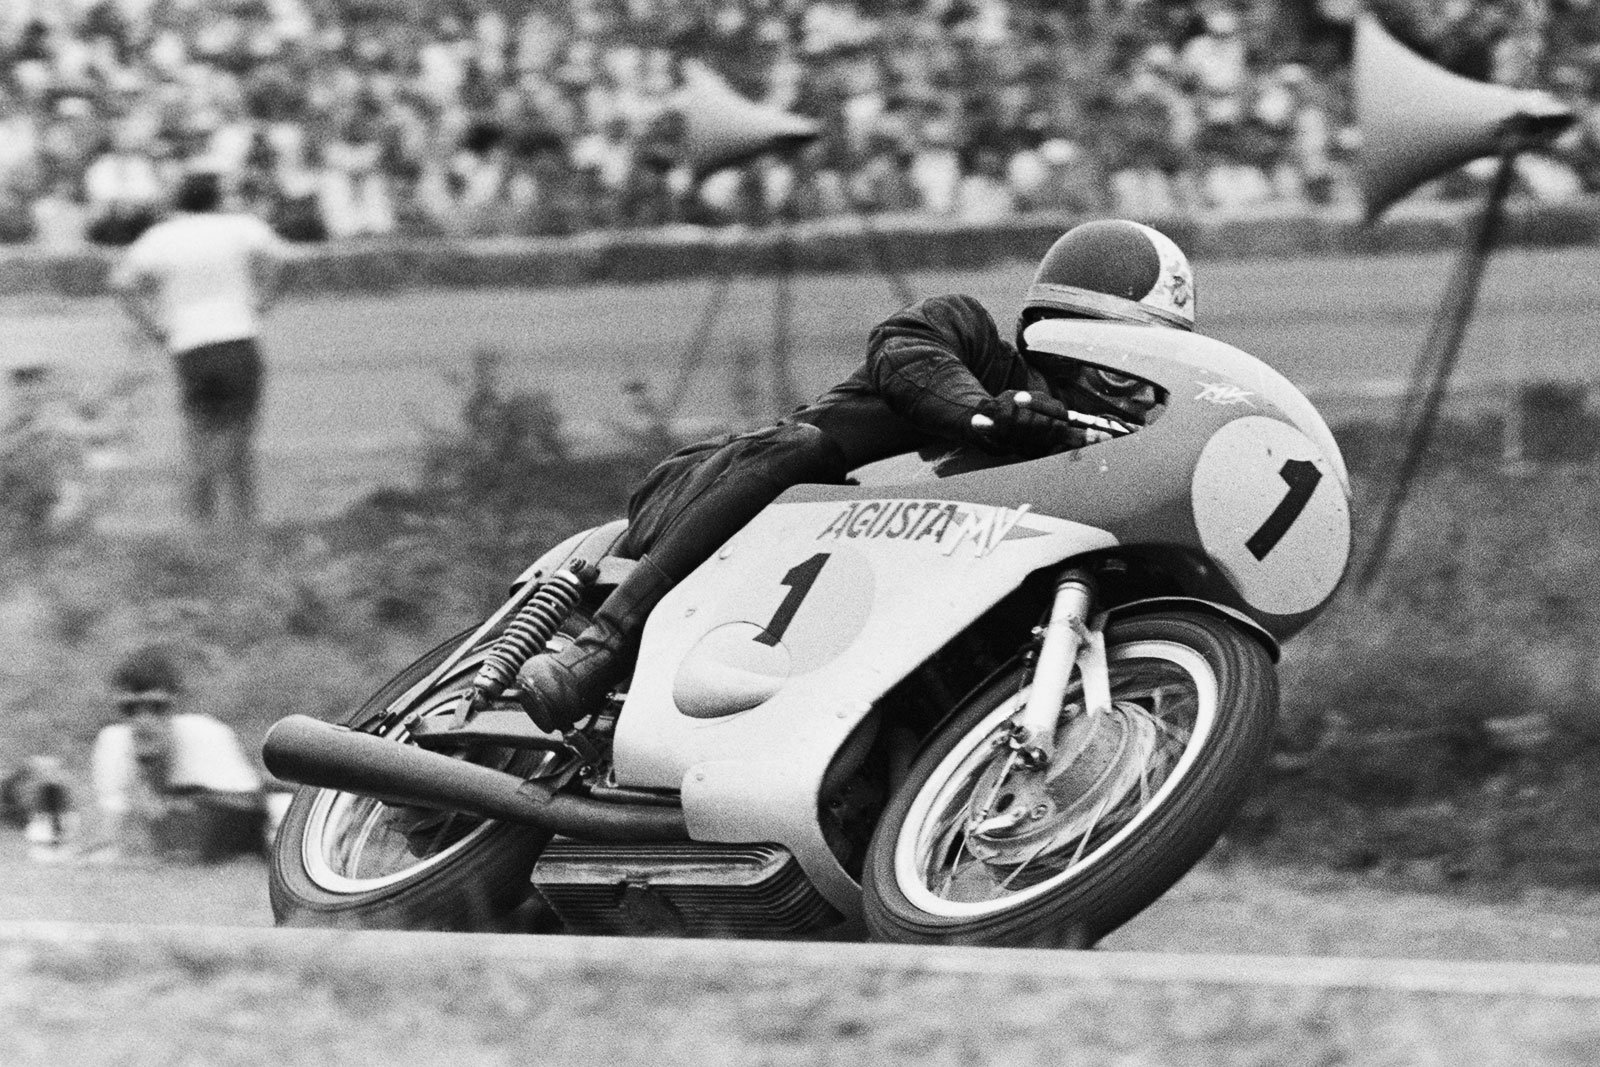 Happy birthday to this legend. Giacomo Agostini is celebrating 75 years of being a legend today! 